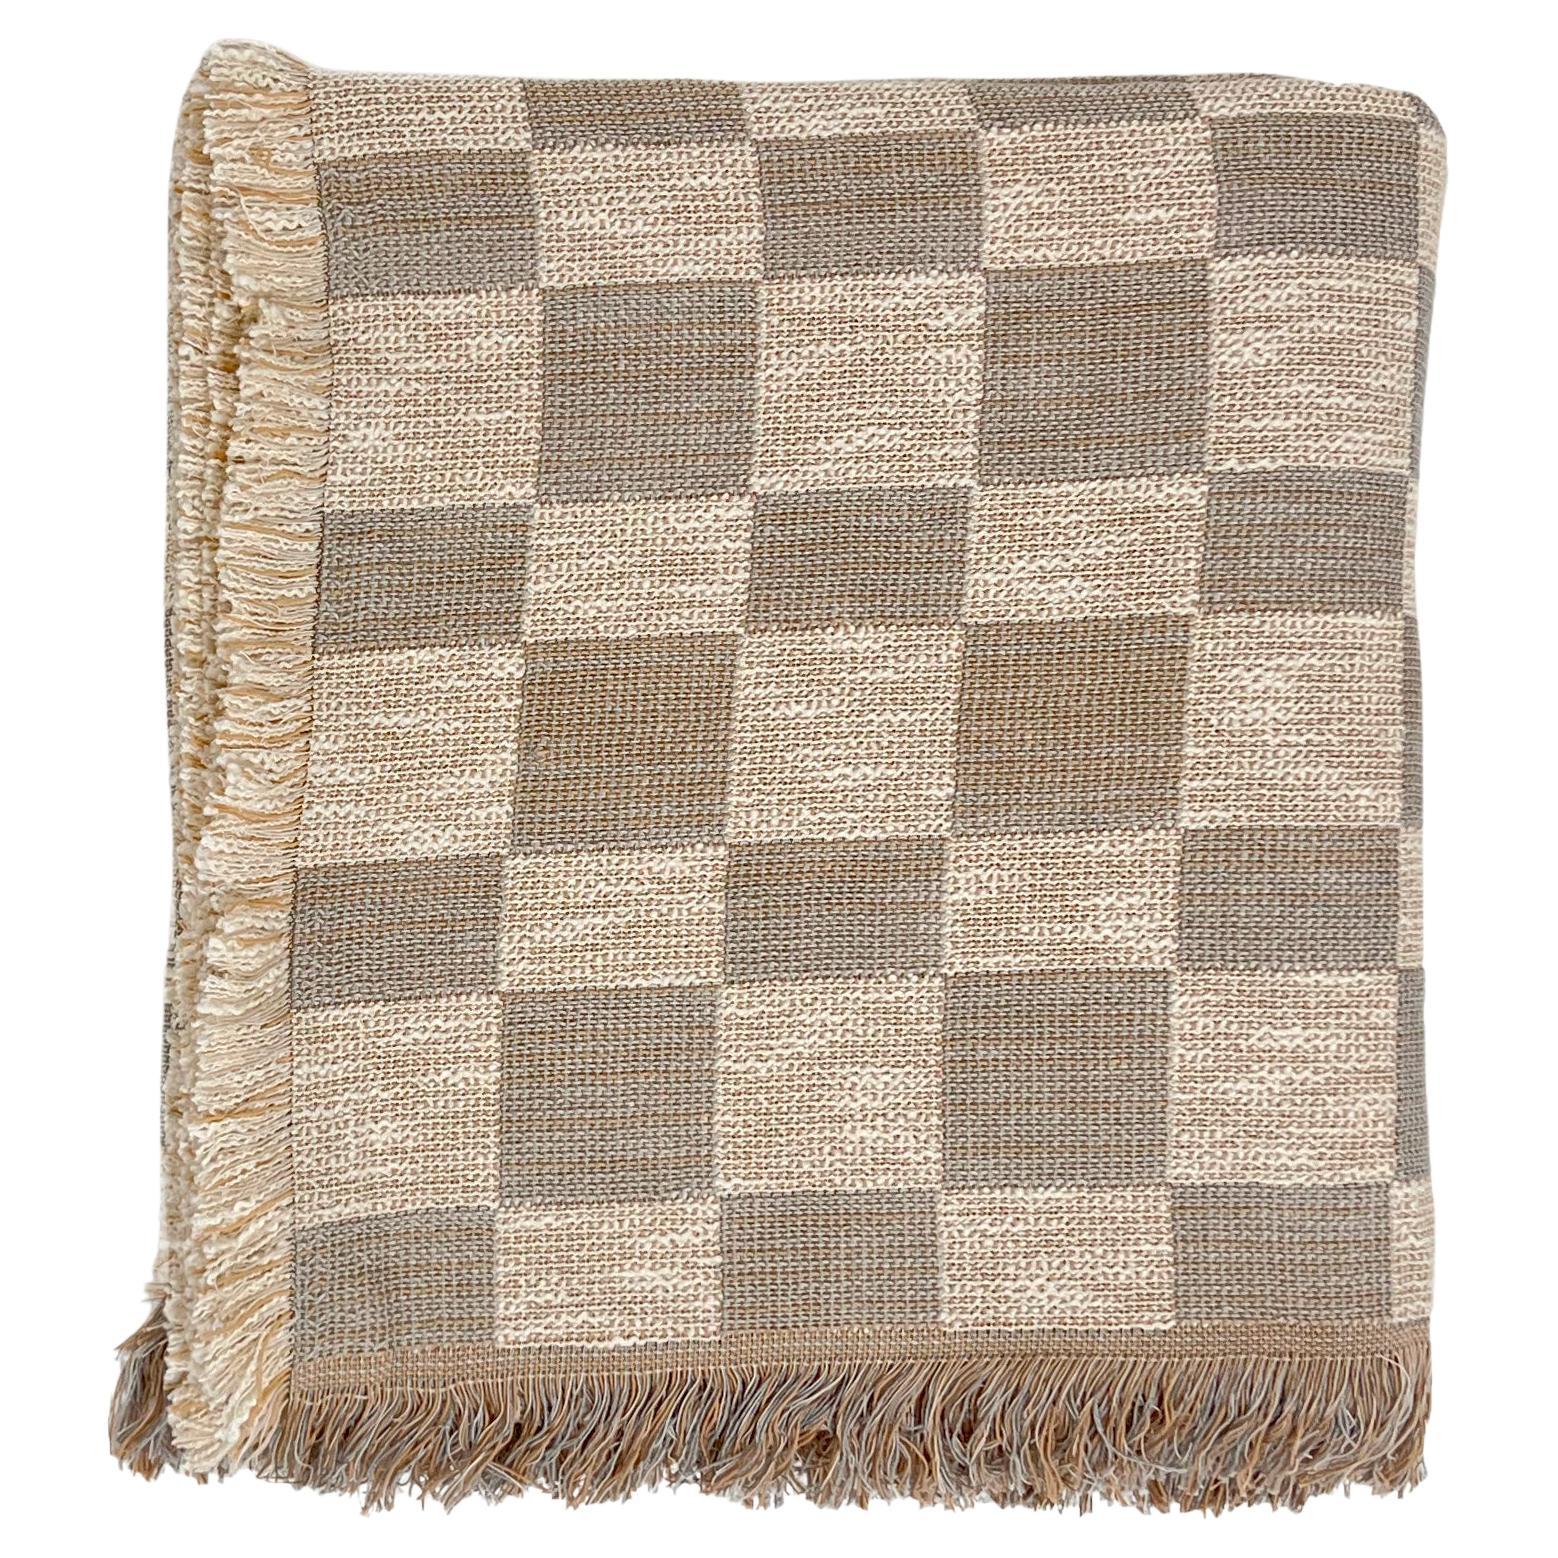 Patterned Woven Cotton Throw Blanket by Folk Textiles (Mariana / Stone)